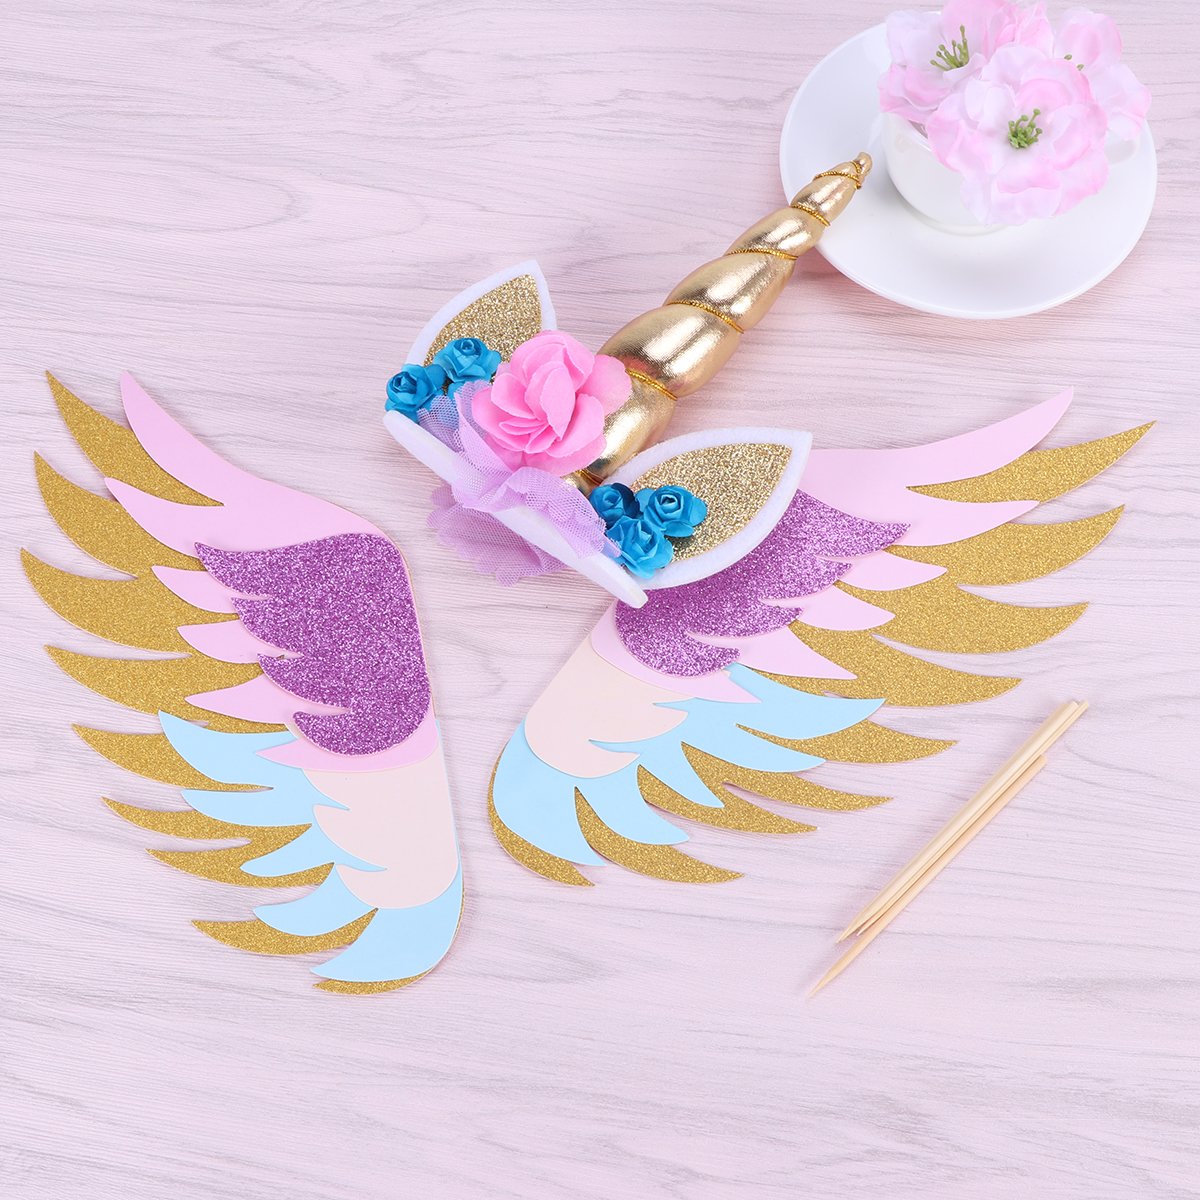 Unicorn Wings Cake Topper Glitter Paper Cake Insertion Card Cake Decoration Cupcake Toppers Birthday Baby Shower Wedding 3PCS - image 3 of 6